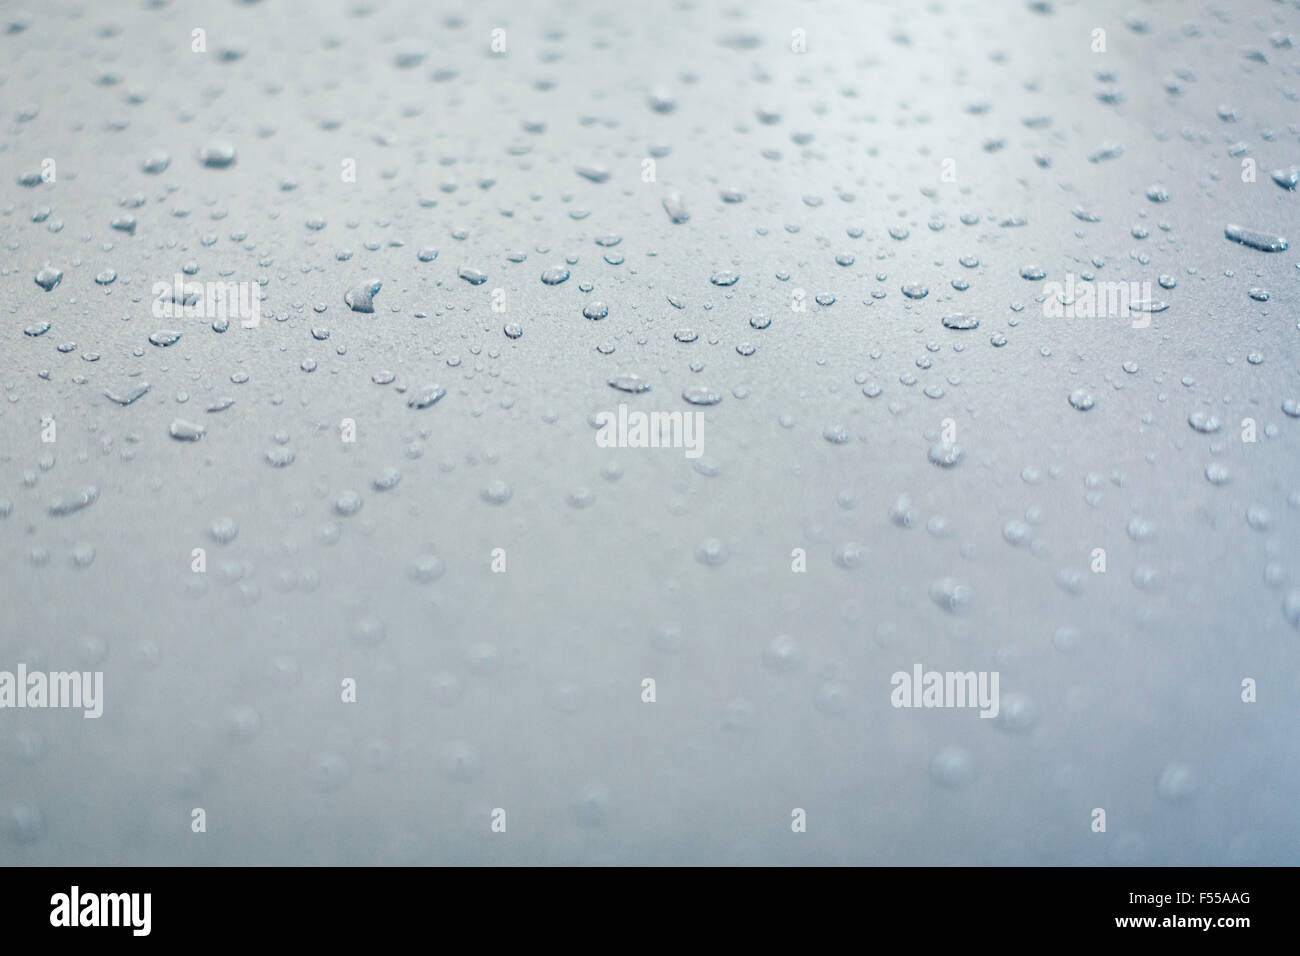 Close-up of water drops on a gray surface Stock Photo